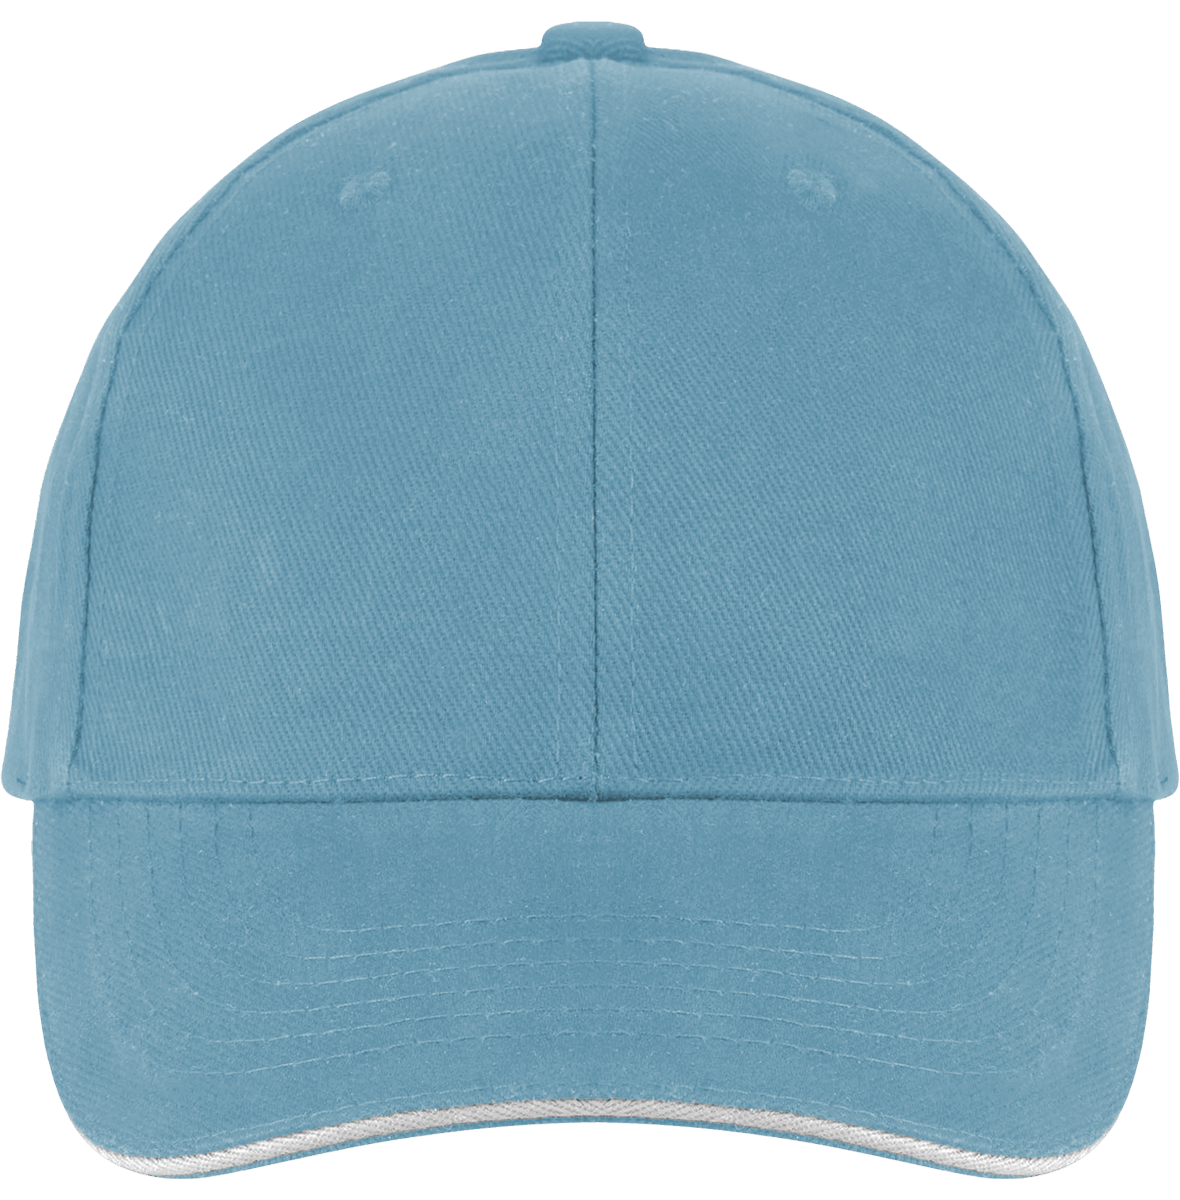 Customize Your 6-Panel Two-Tone Cap On Tunetoo Sky Blue / White